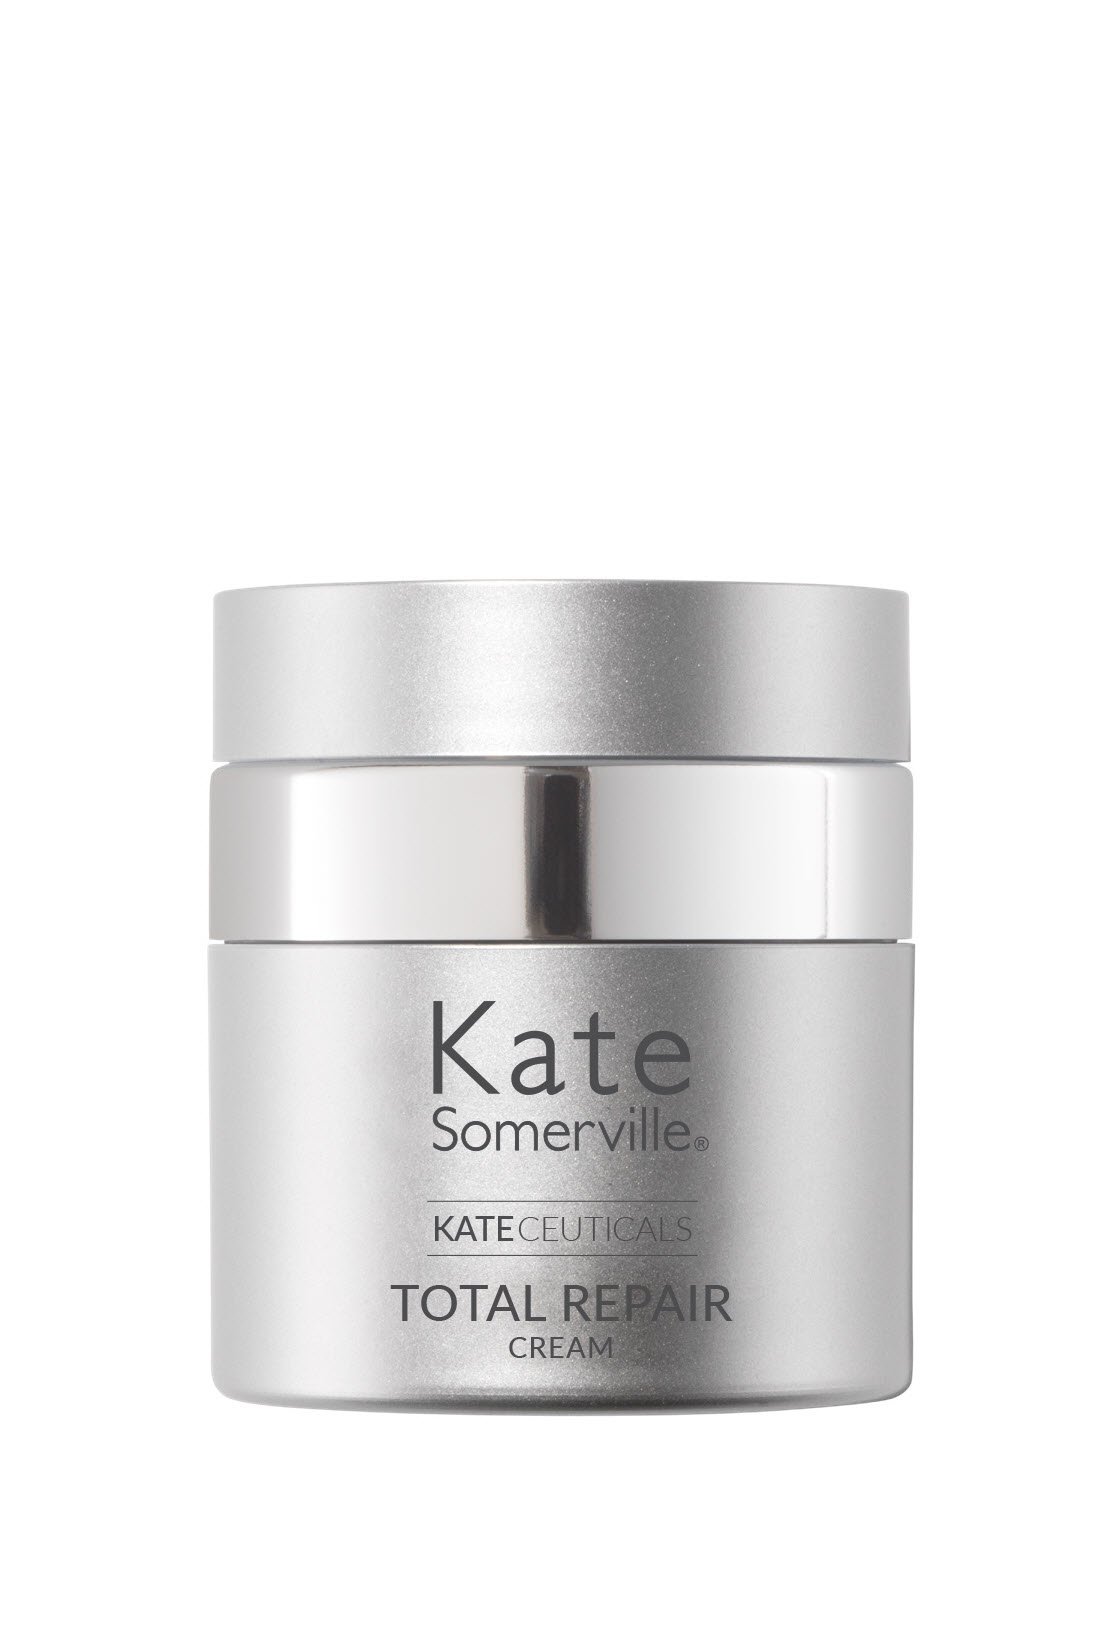 Kate Somerville’s New Anti-Aging Cream Is Like A Facial In A Bottle